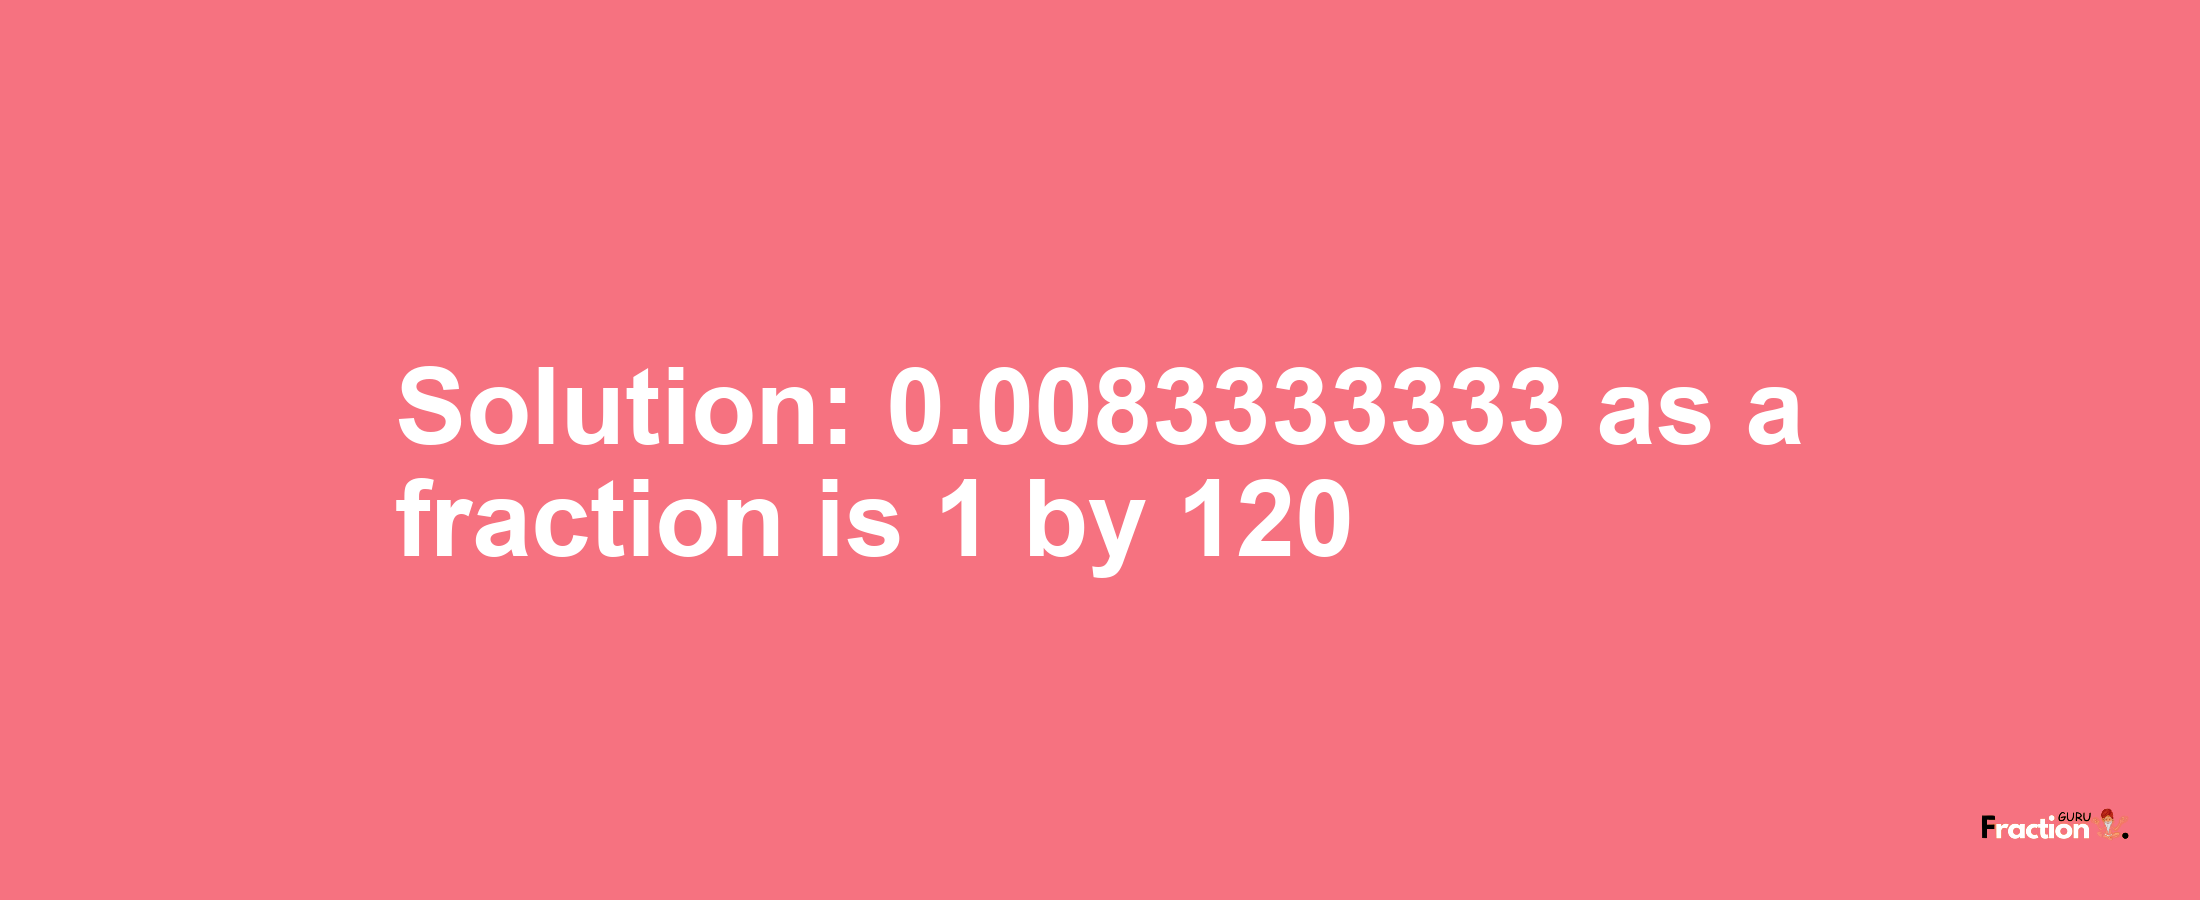 Solution:0.0083333333 as a fraction is 1/120